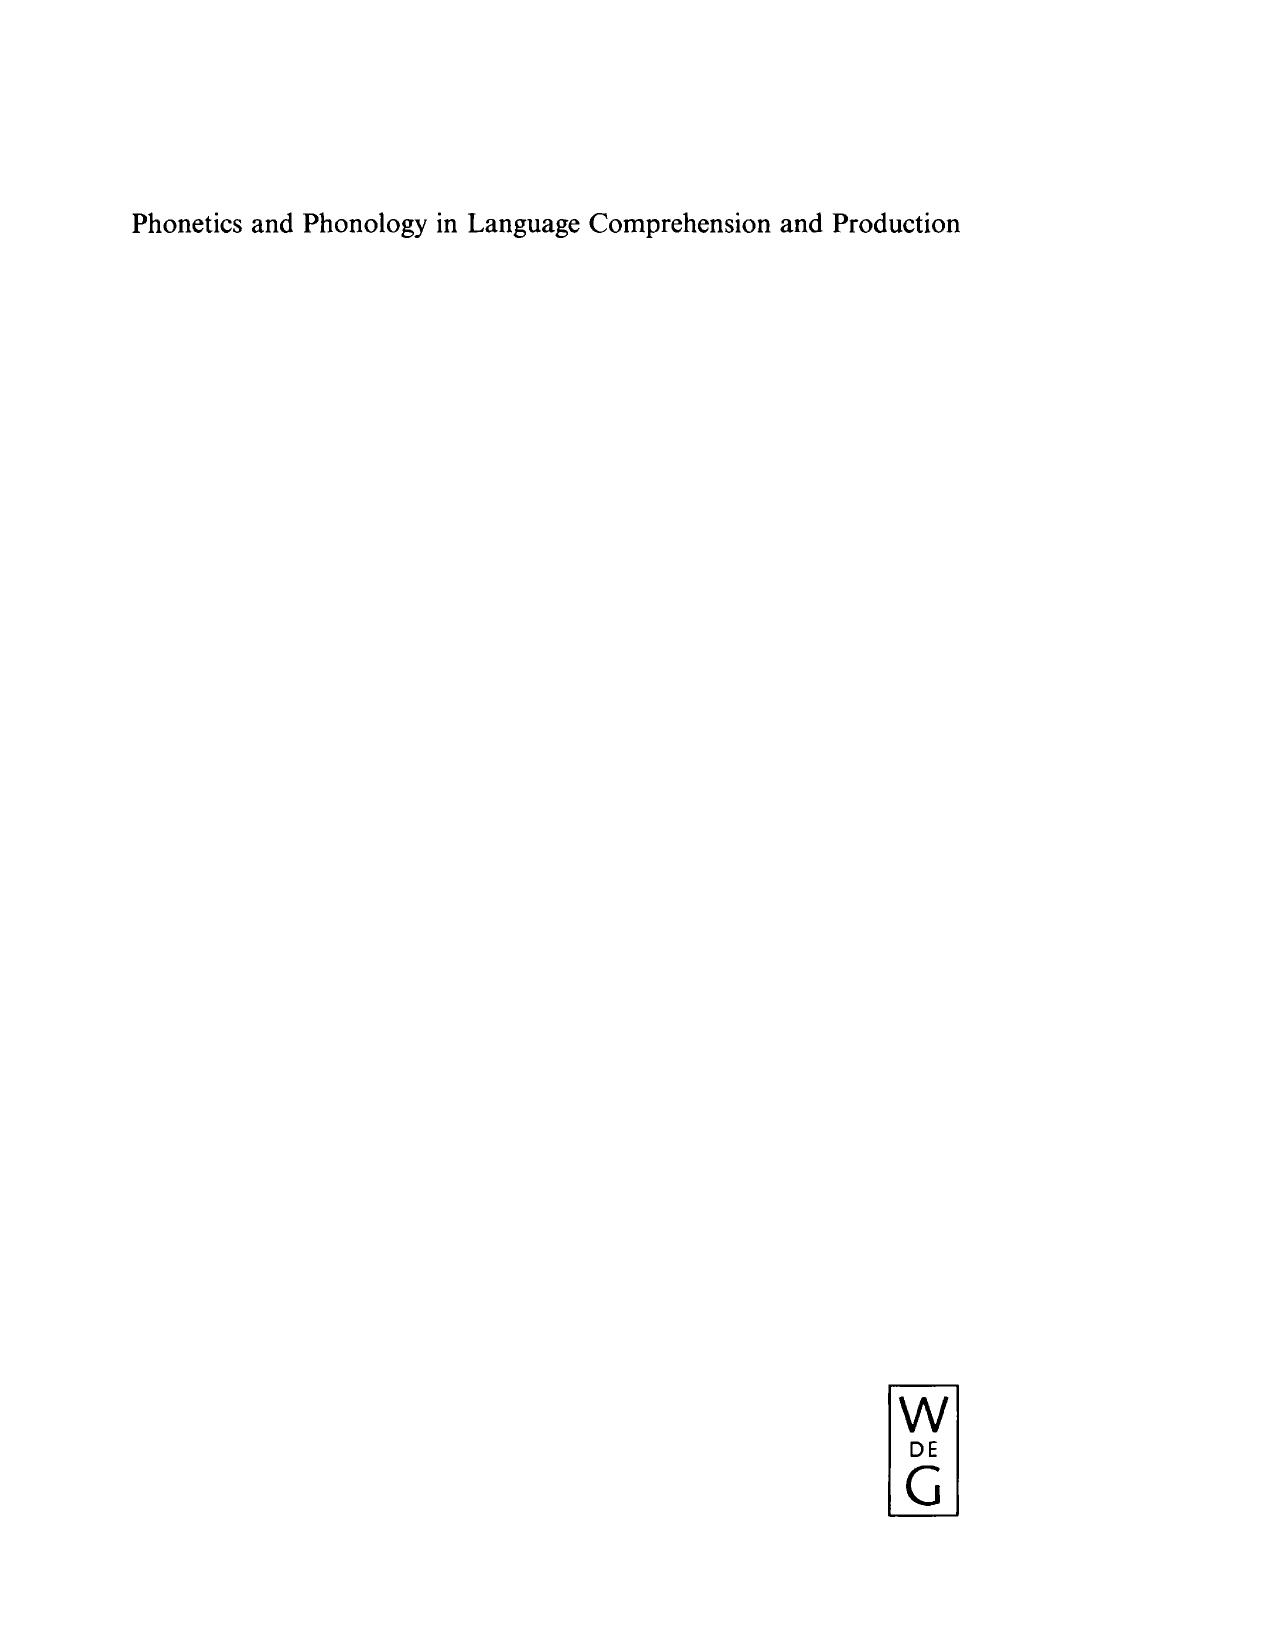 Phonetics and Phonology in Language Comprehension and Production: Differences and Similarities by Antje S. Meyer (editor) Niels O. Schiller (editor)